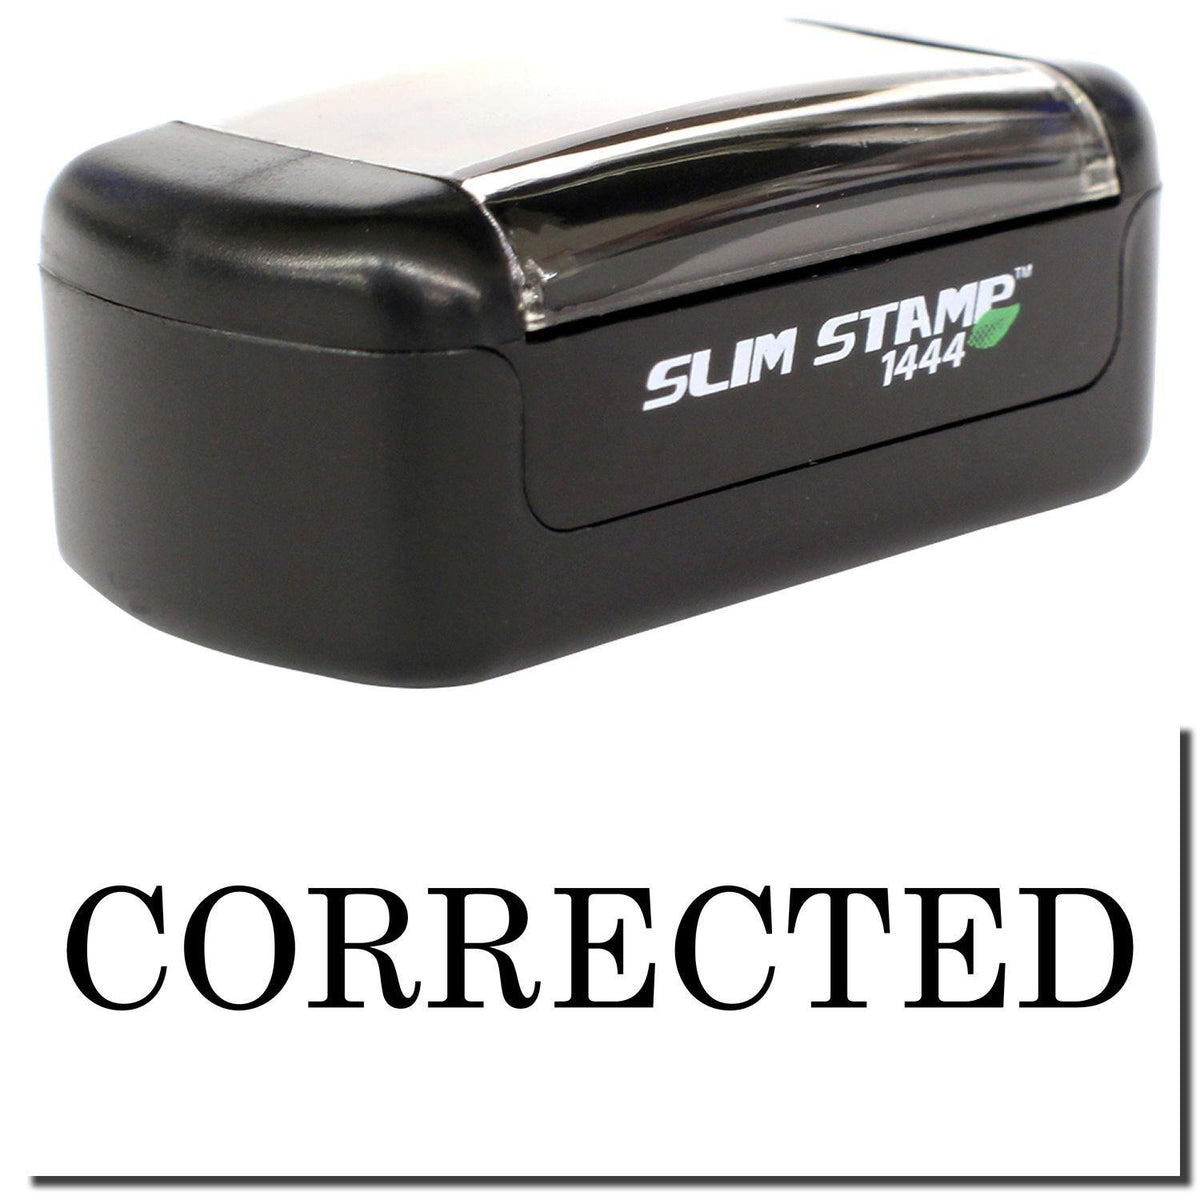 A stock office pre-inked stamp with a stamped image showing how the text &quot;CORRECTED&quot; is displayed after stamping.